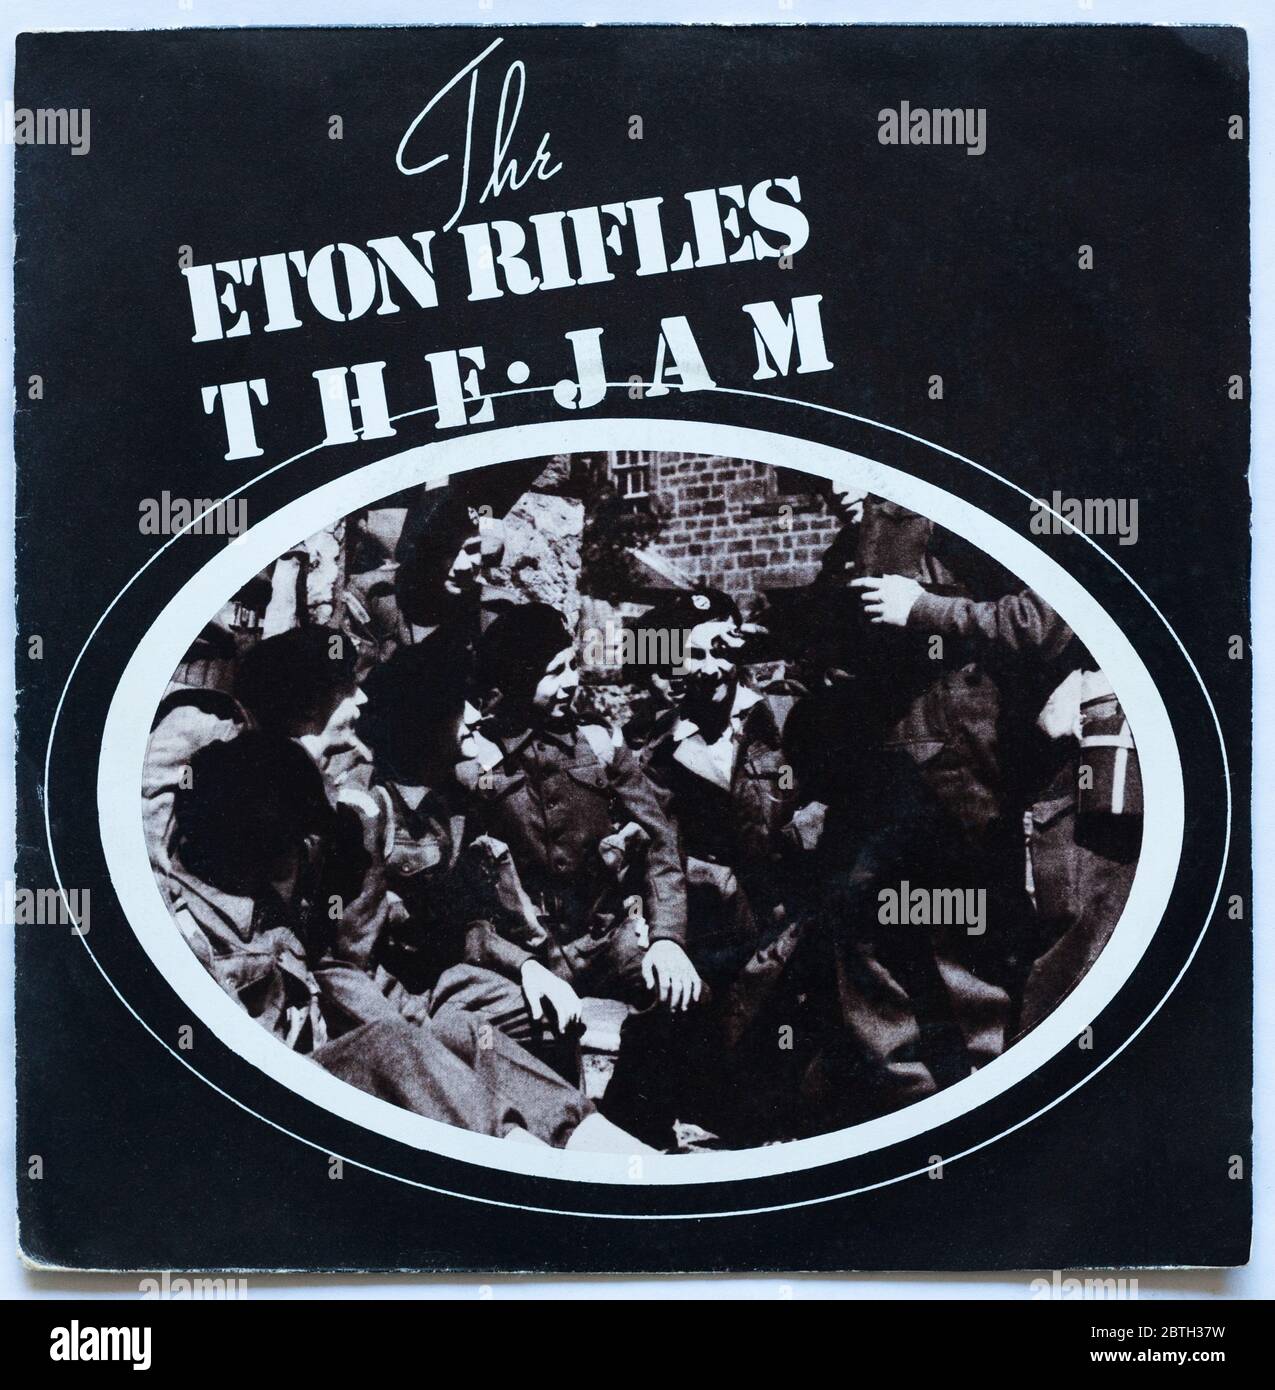 The cover of Eton Rifles, 1979 single by The Jam on Polydor - Editorial use only Stock Photo